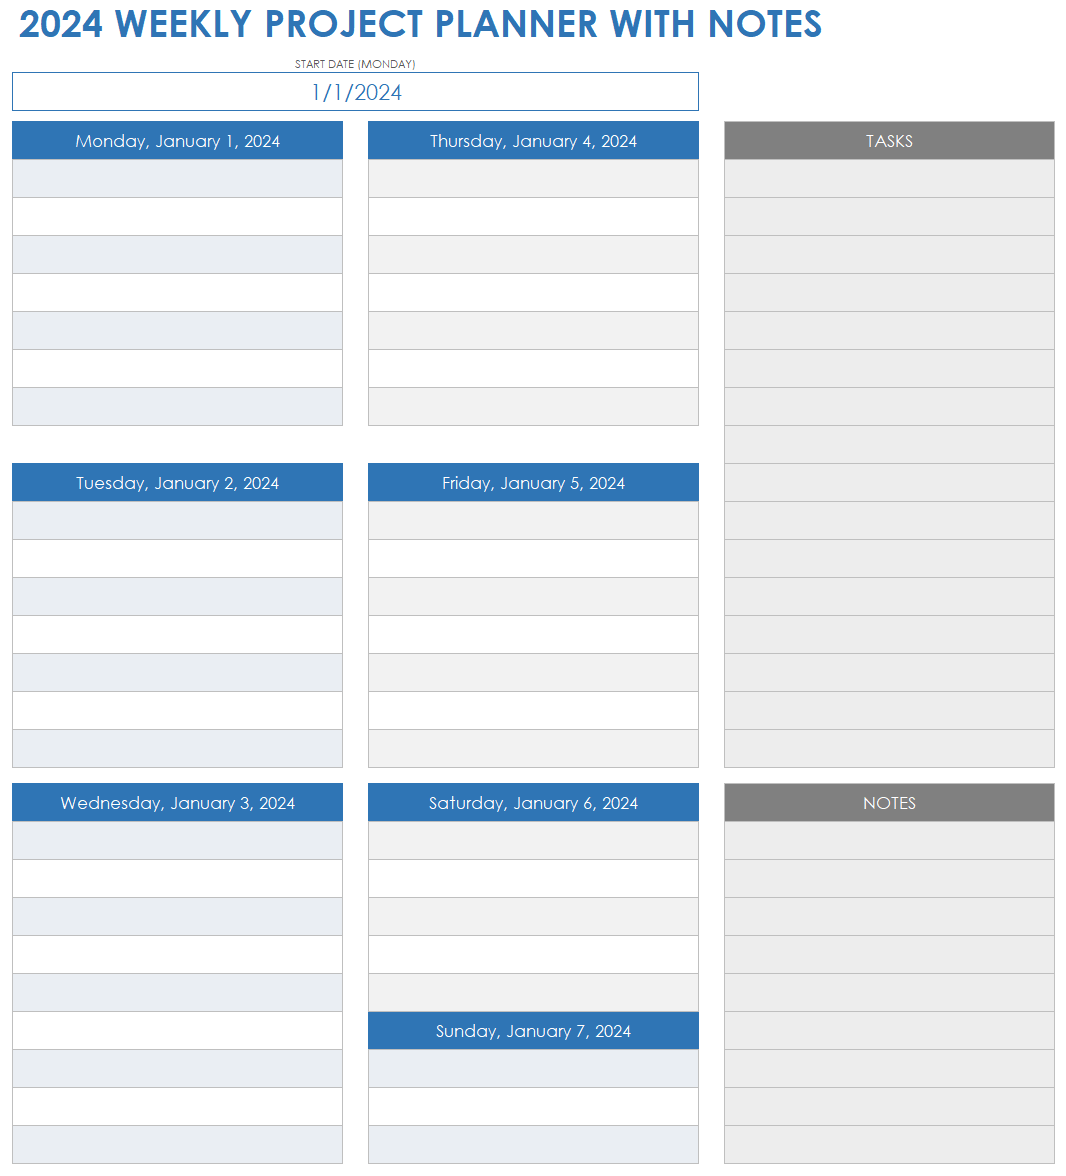 2024 Weekly Project Planner Template with Notes